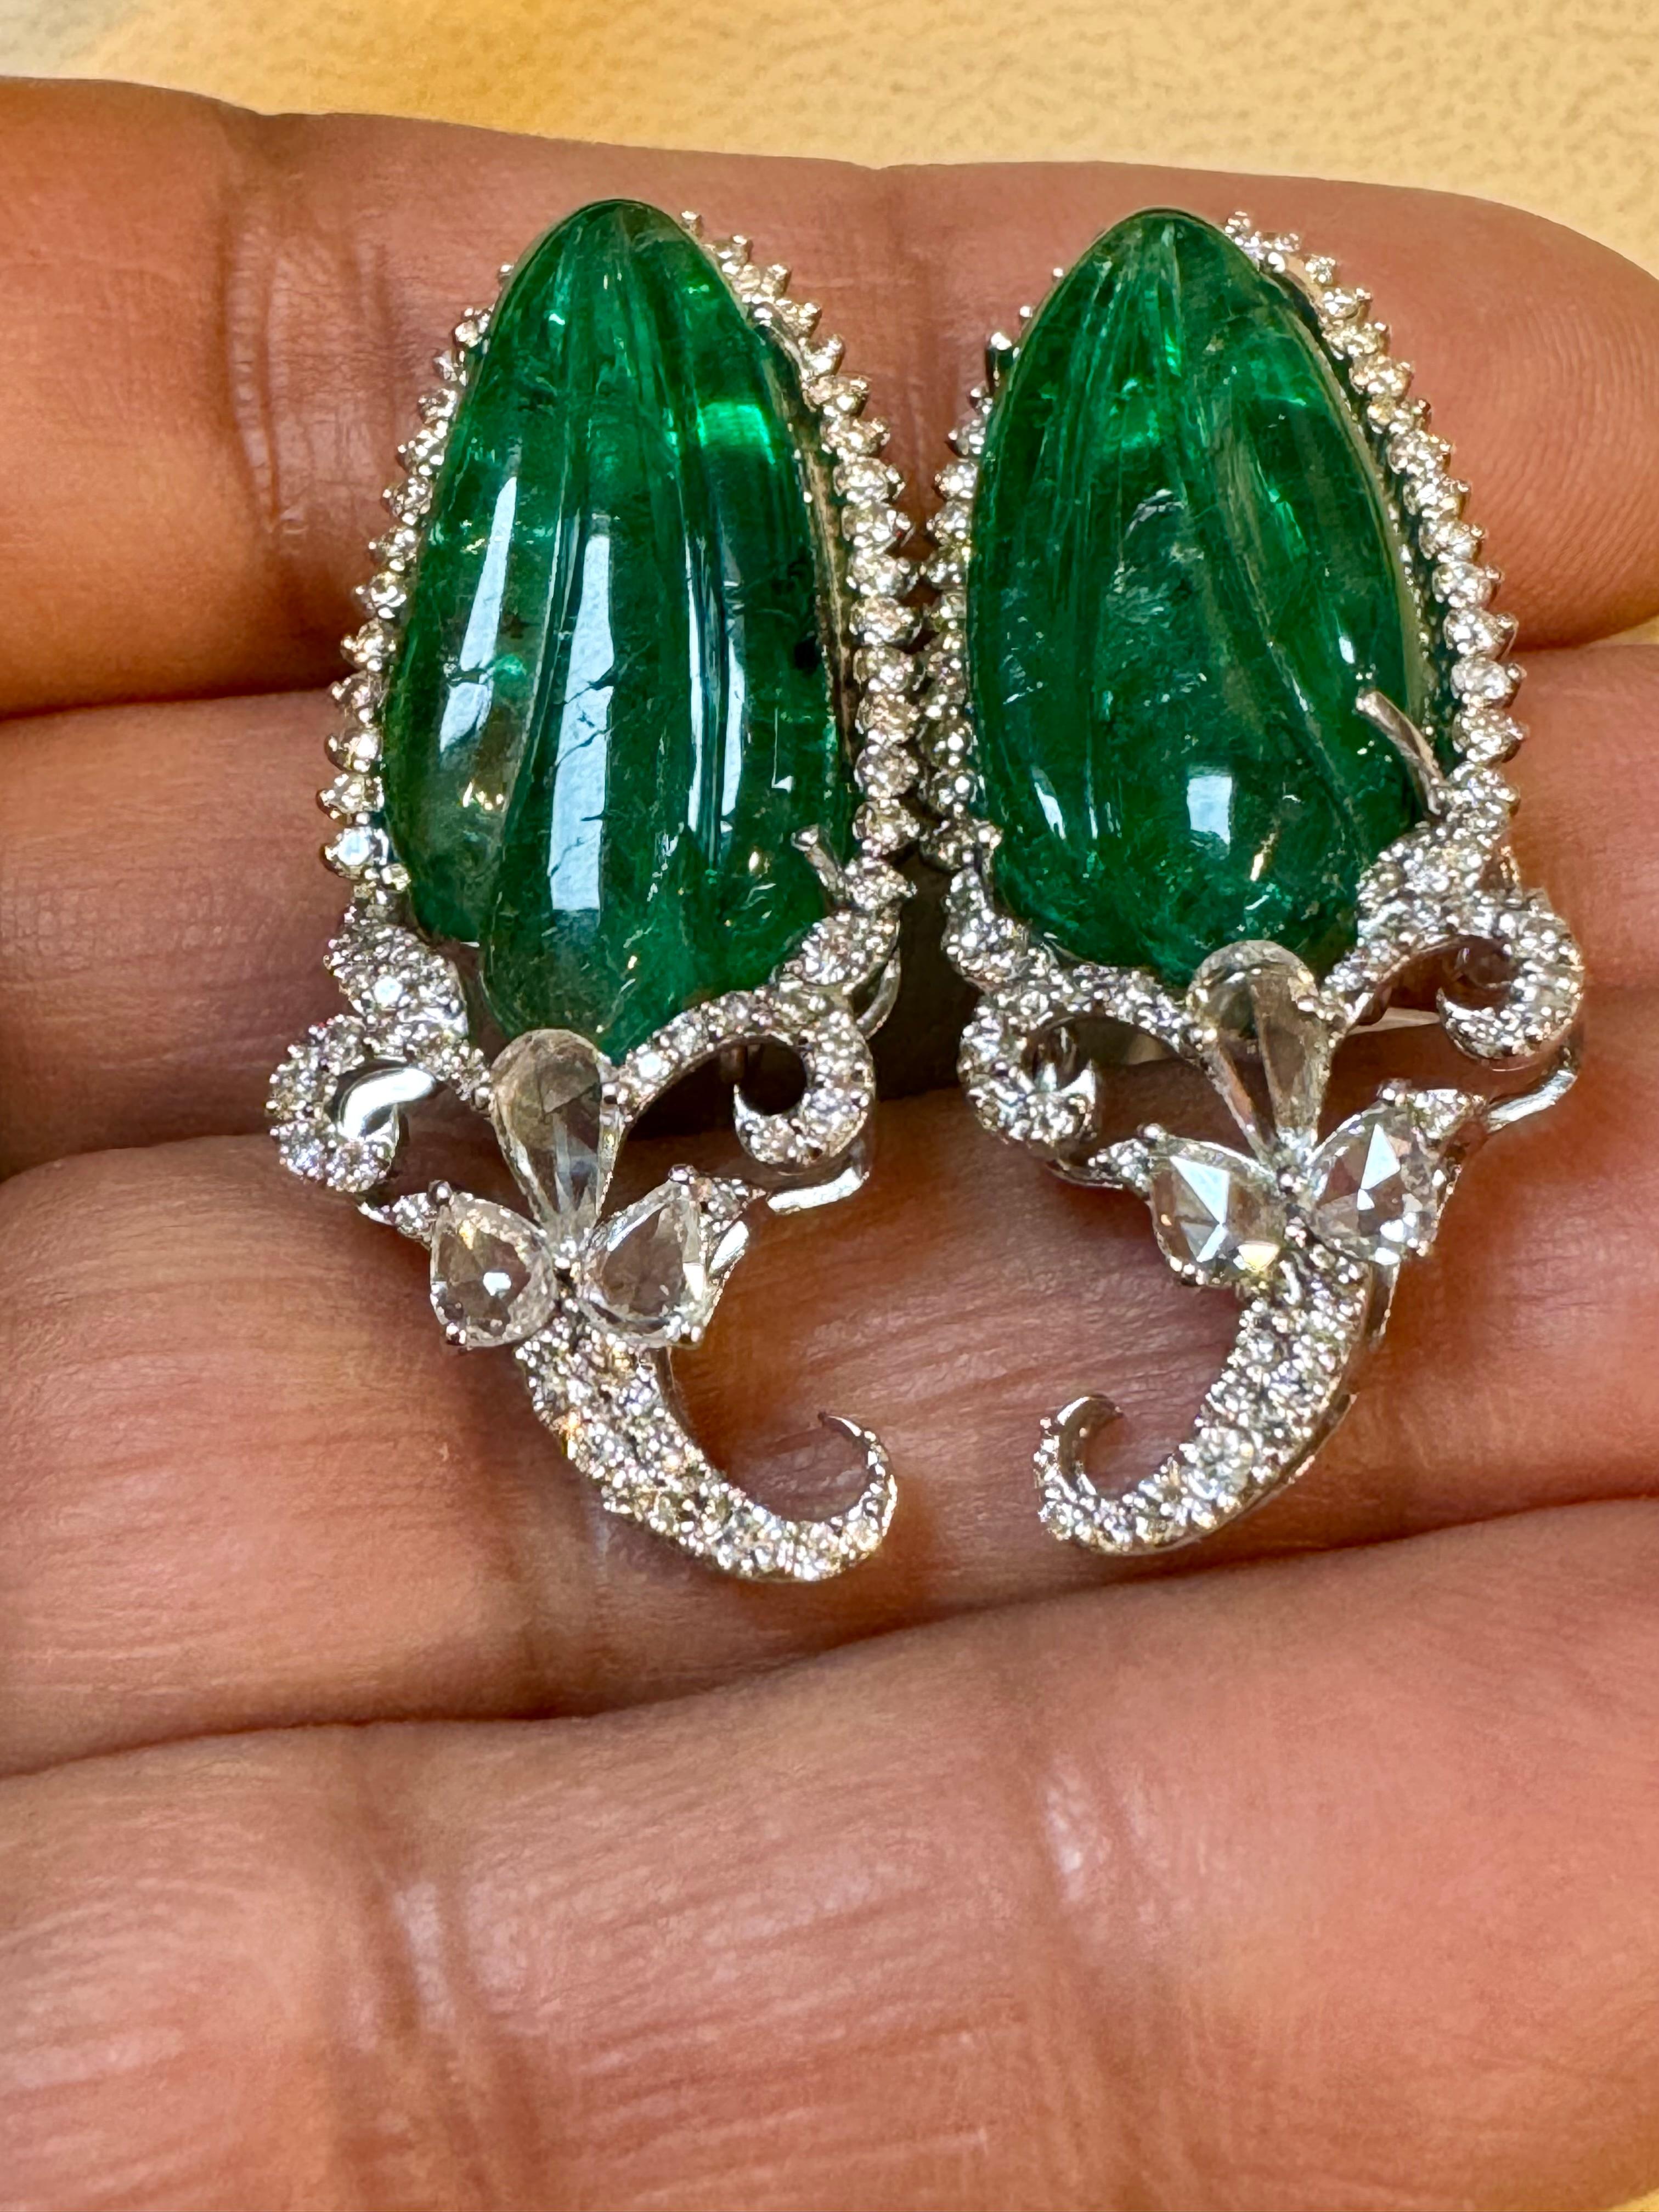 22 Ct Carved Emerald & 2 Ct Diamond Earrings 18 Karat White Gold Post Earrings In Excellent Condition For Sale In New York, NY